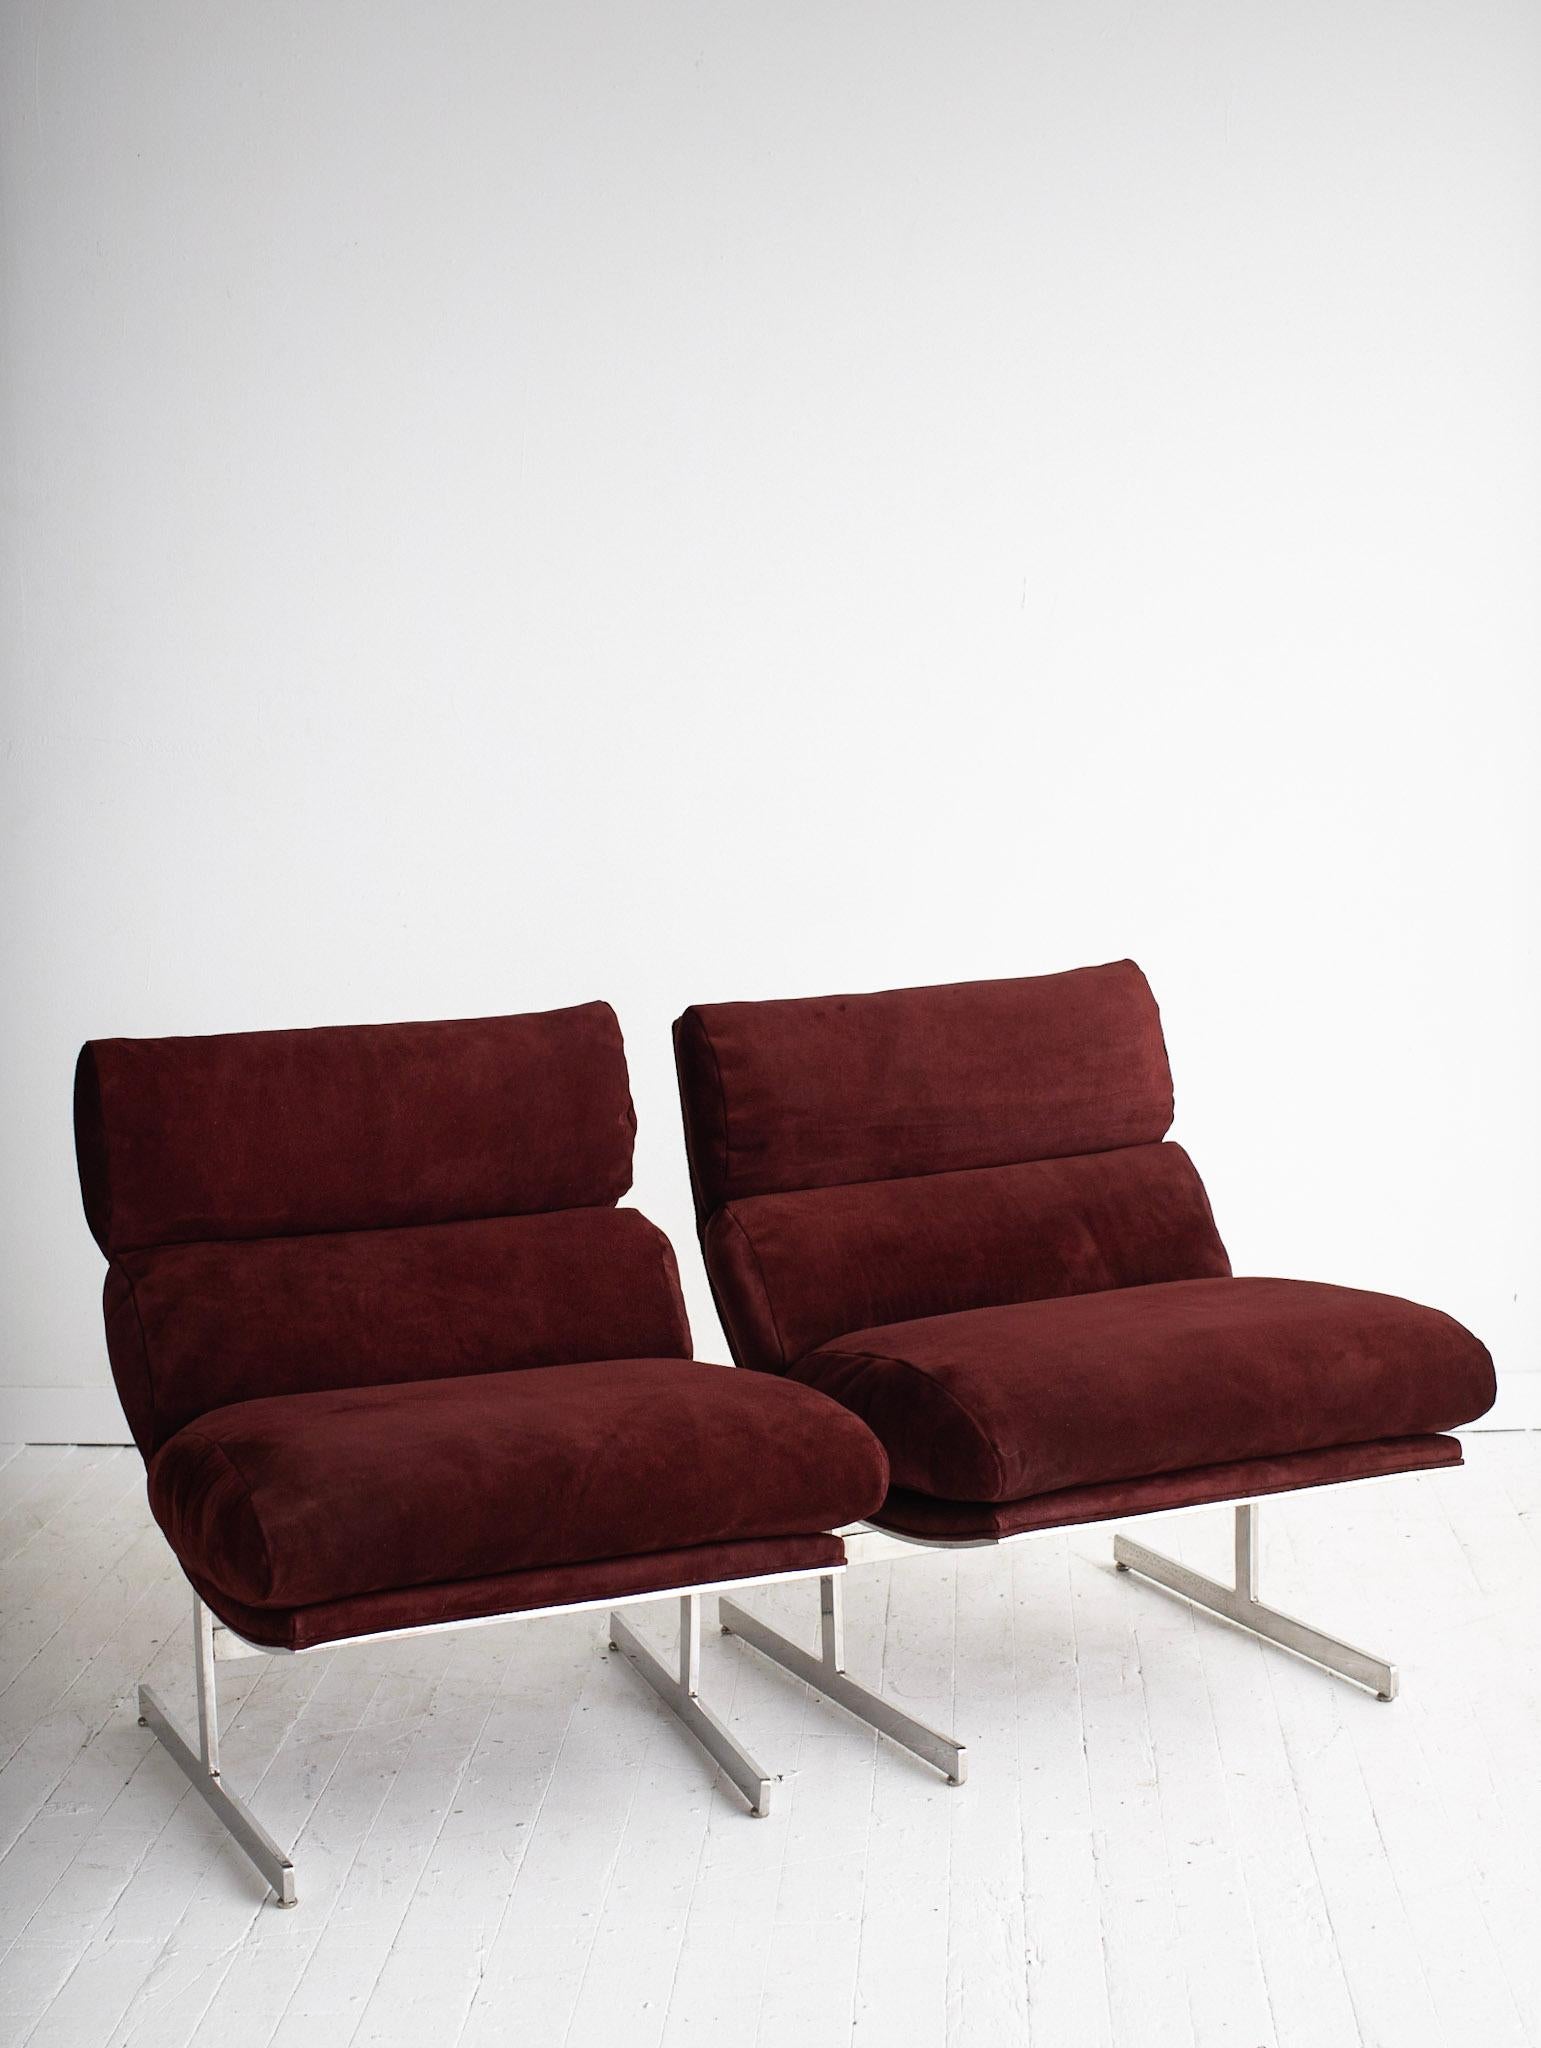 Kipp Stewart for Directional chrome “arc” lounge chair newly reupholstered in burgundy suede. Heavy polished steel cantilever frame. Sold individually. No tags present.